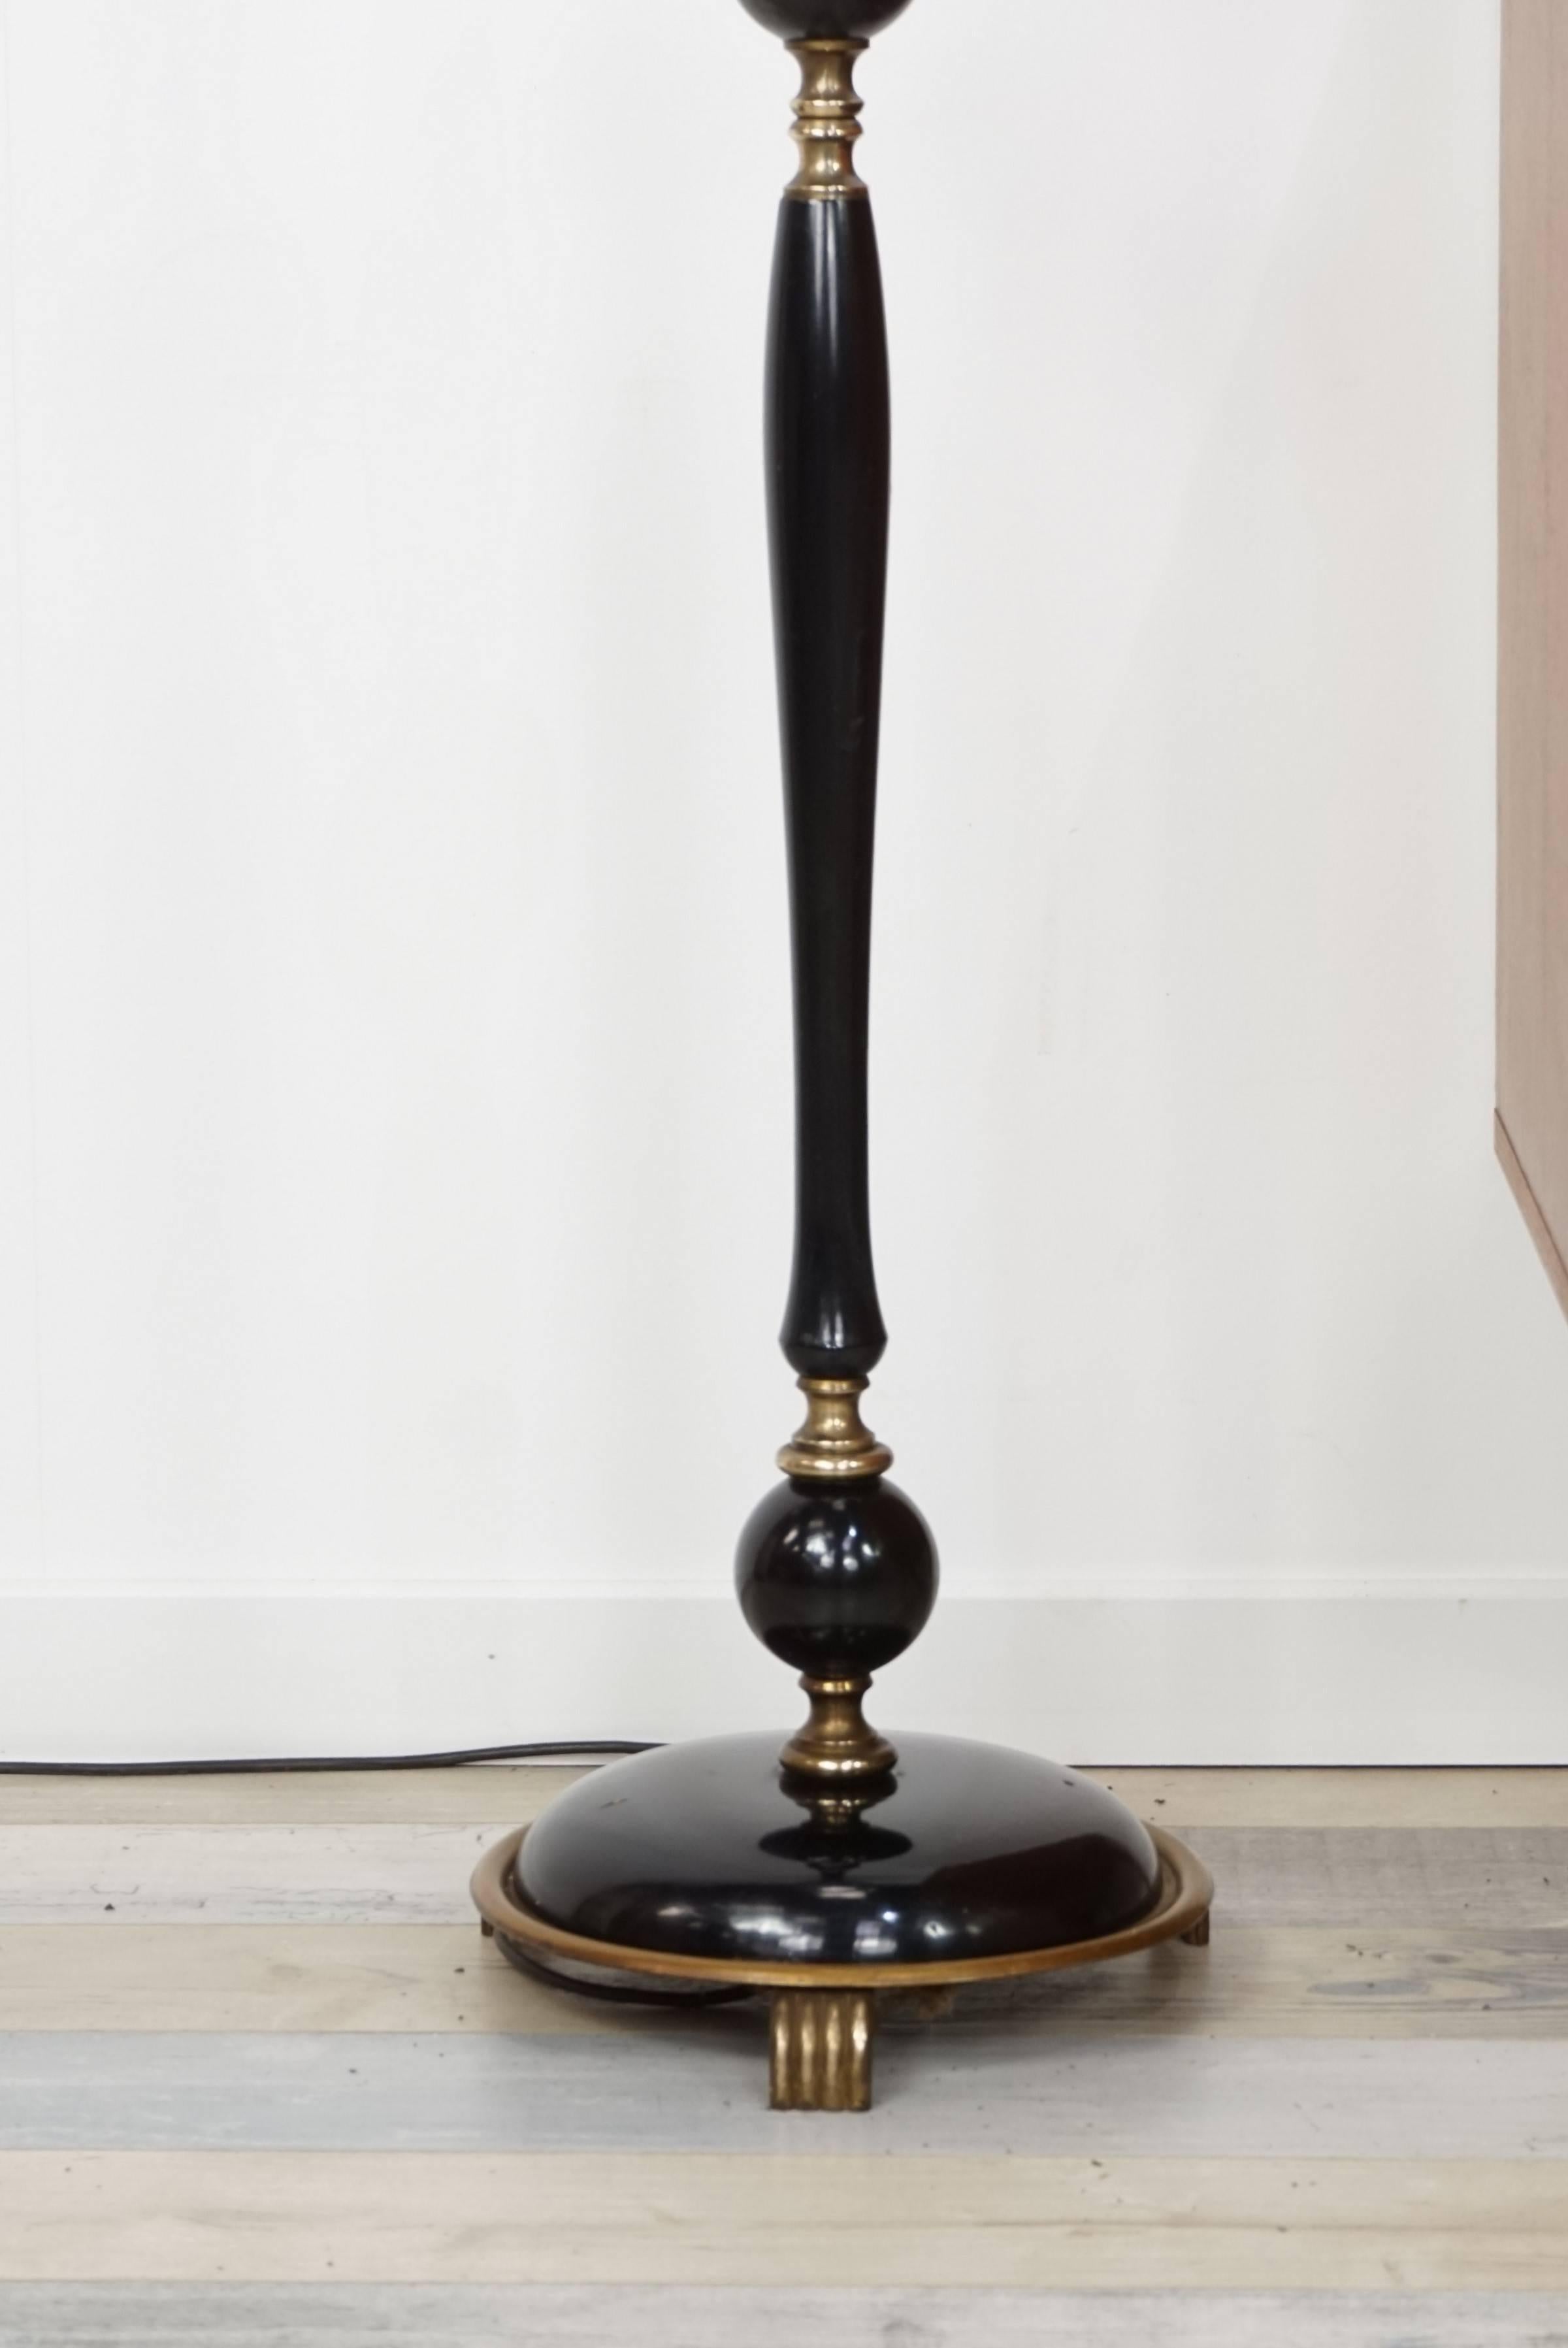 20th Century Black Lacquered Wood and Brass Floor Lamp from the 1950s